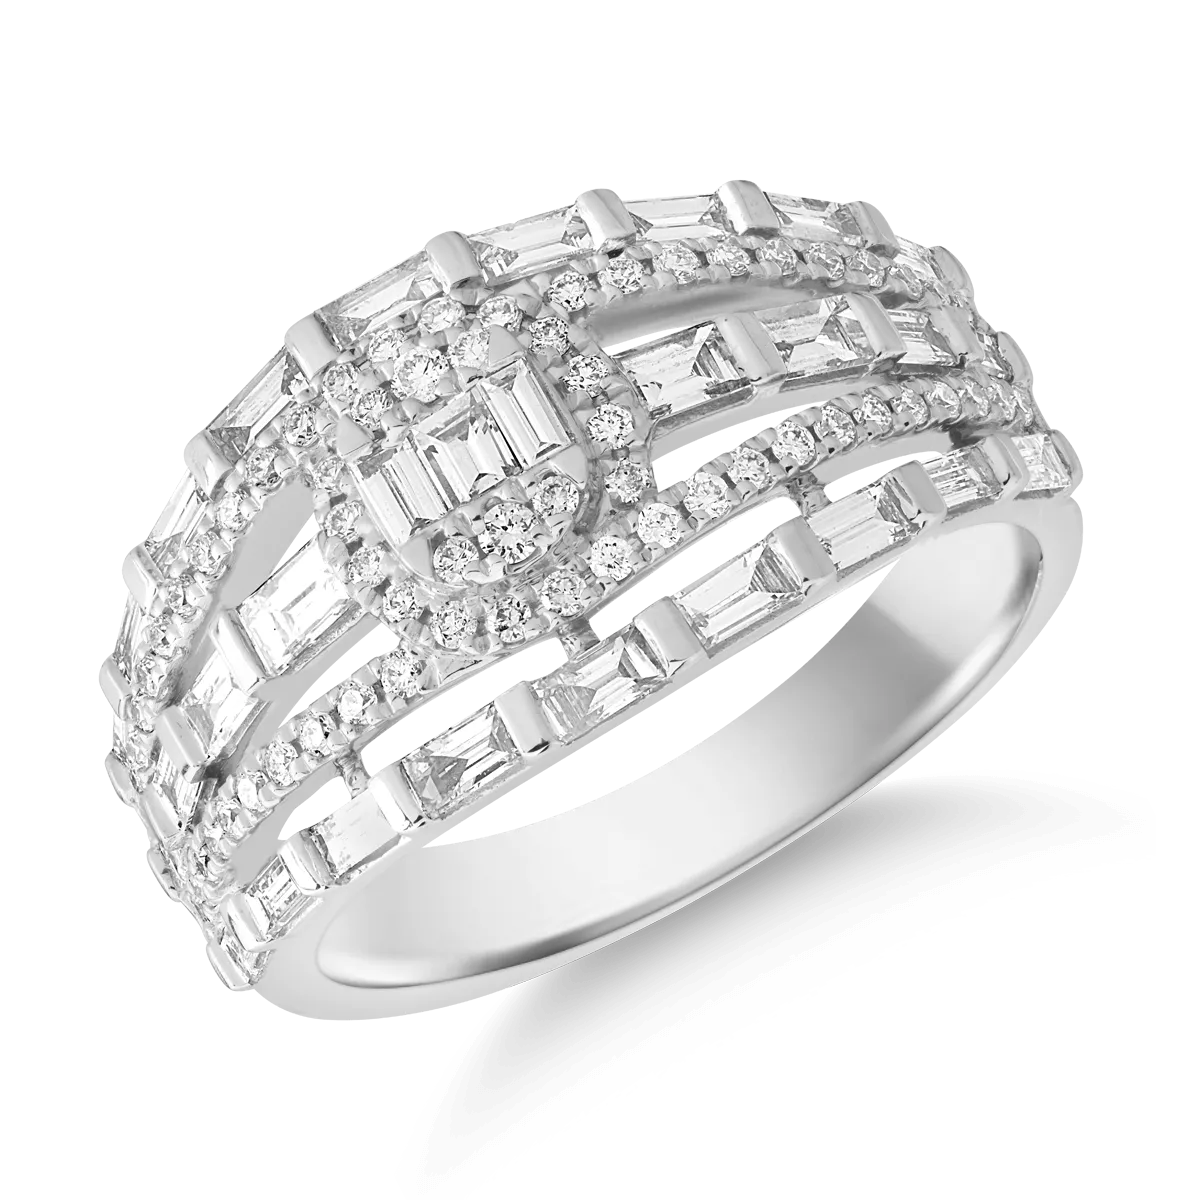 18K white gold ring with 1.04ct diamonds